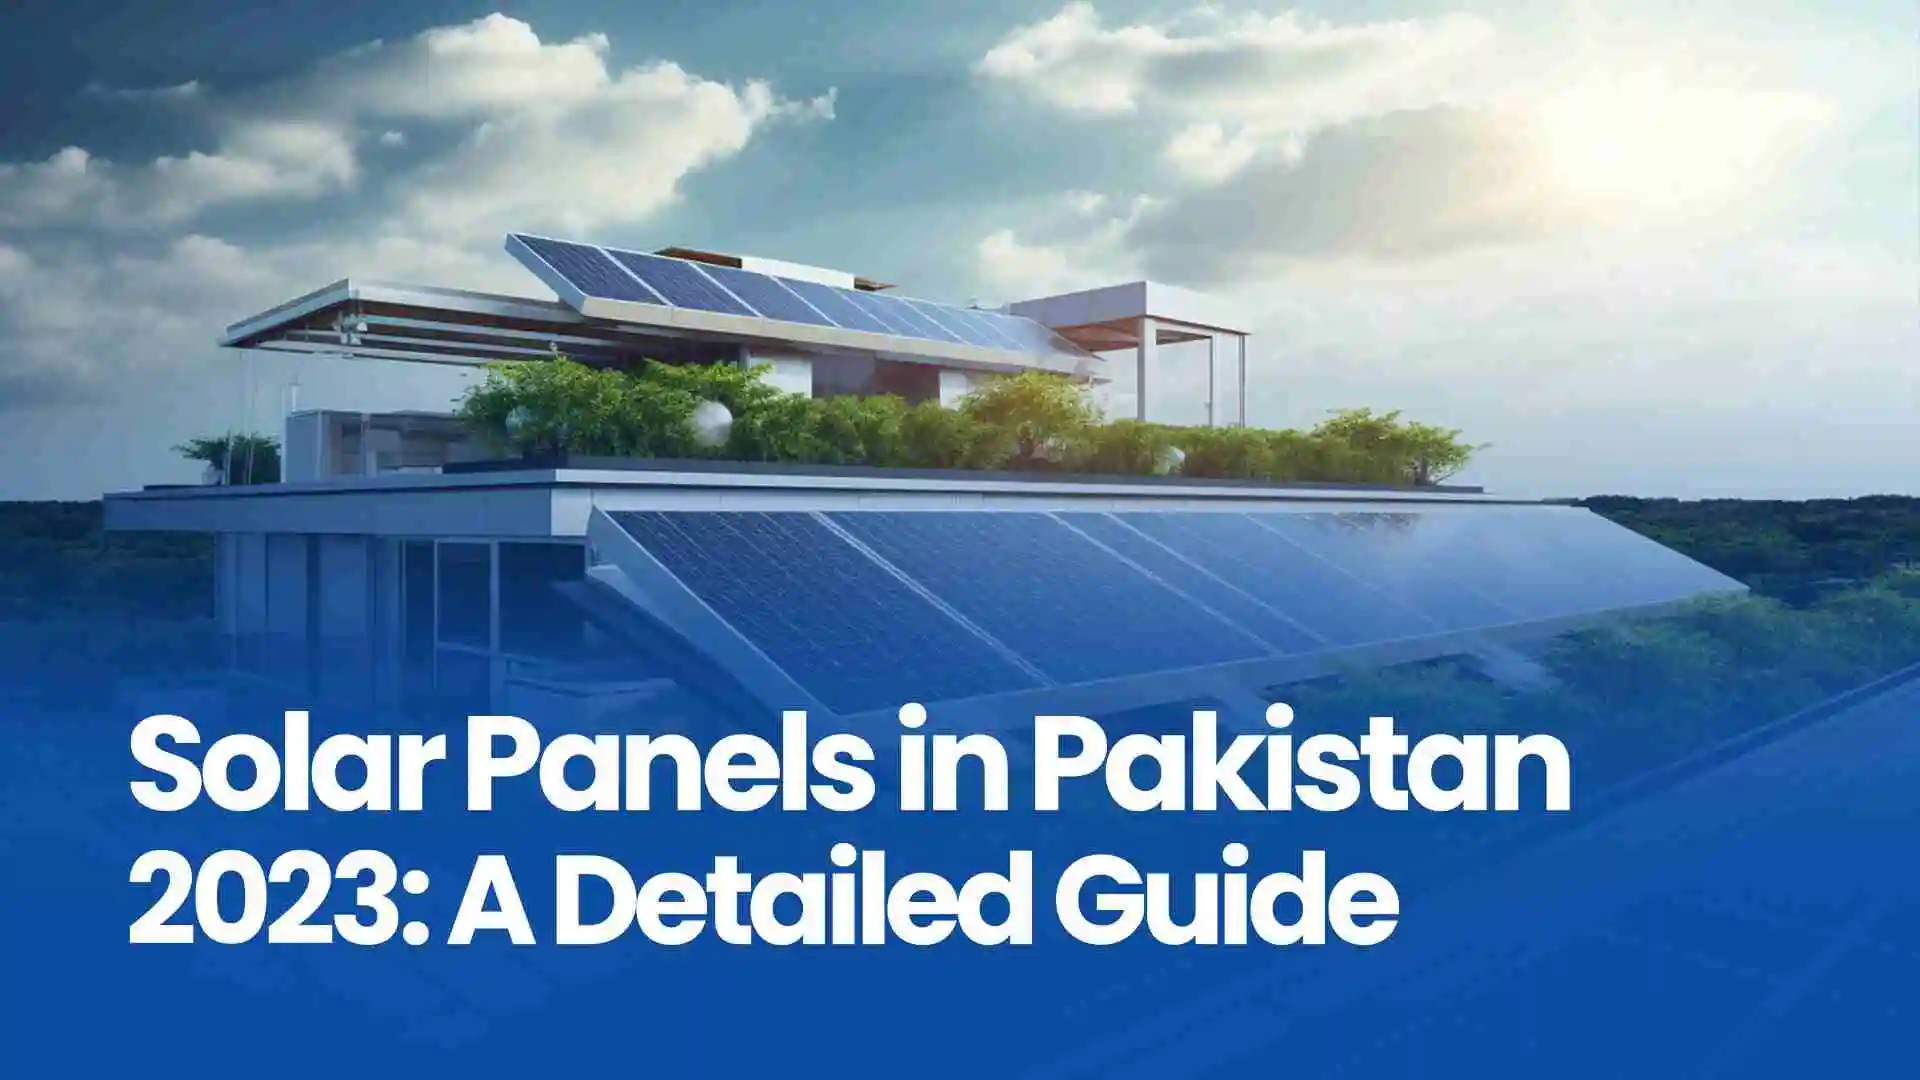 Solar Panel in Pakistan 2023 a Detailed Guide